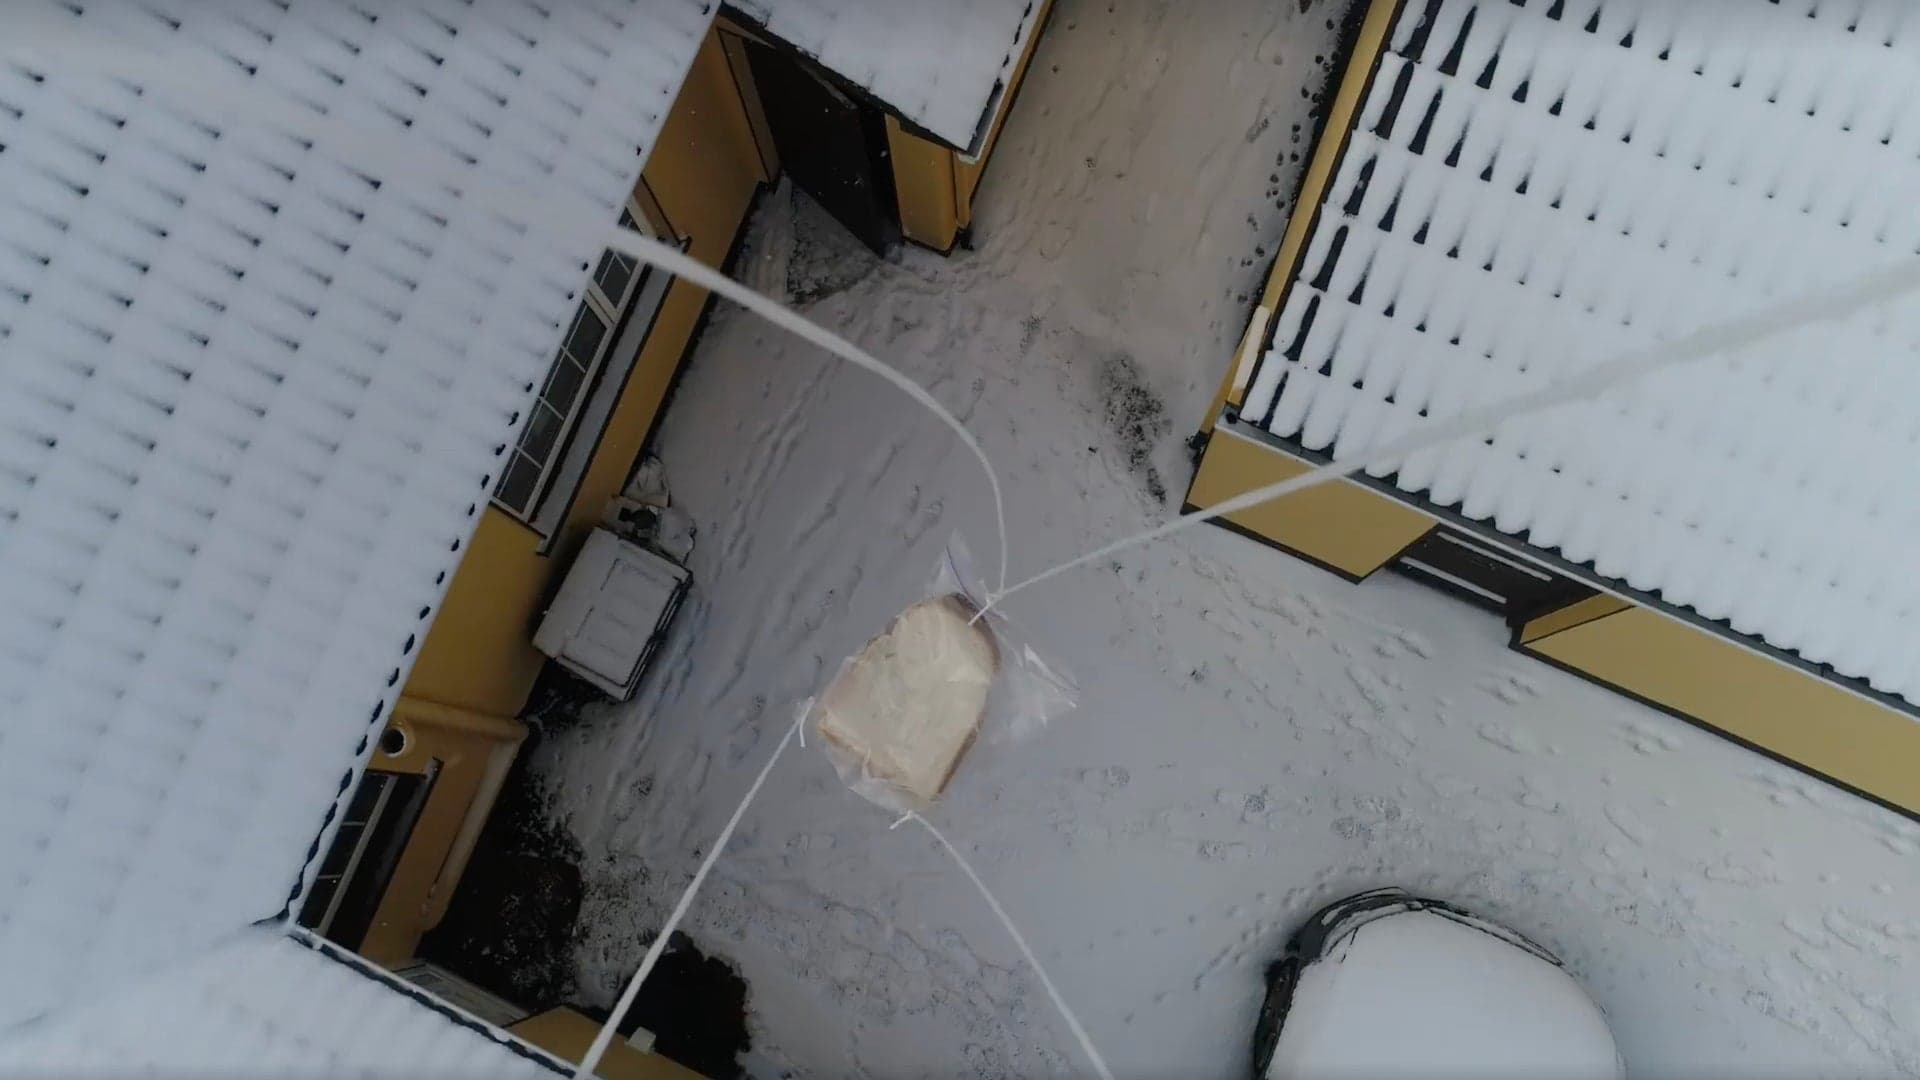 Drone Delivers Bread to Fellow Citizens Amidst Food Scarcity in Ireland